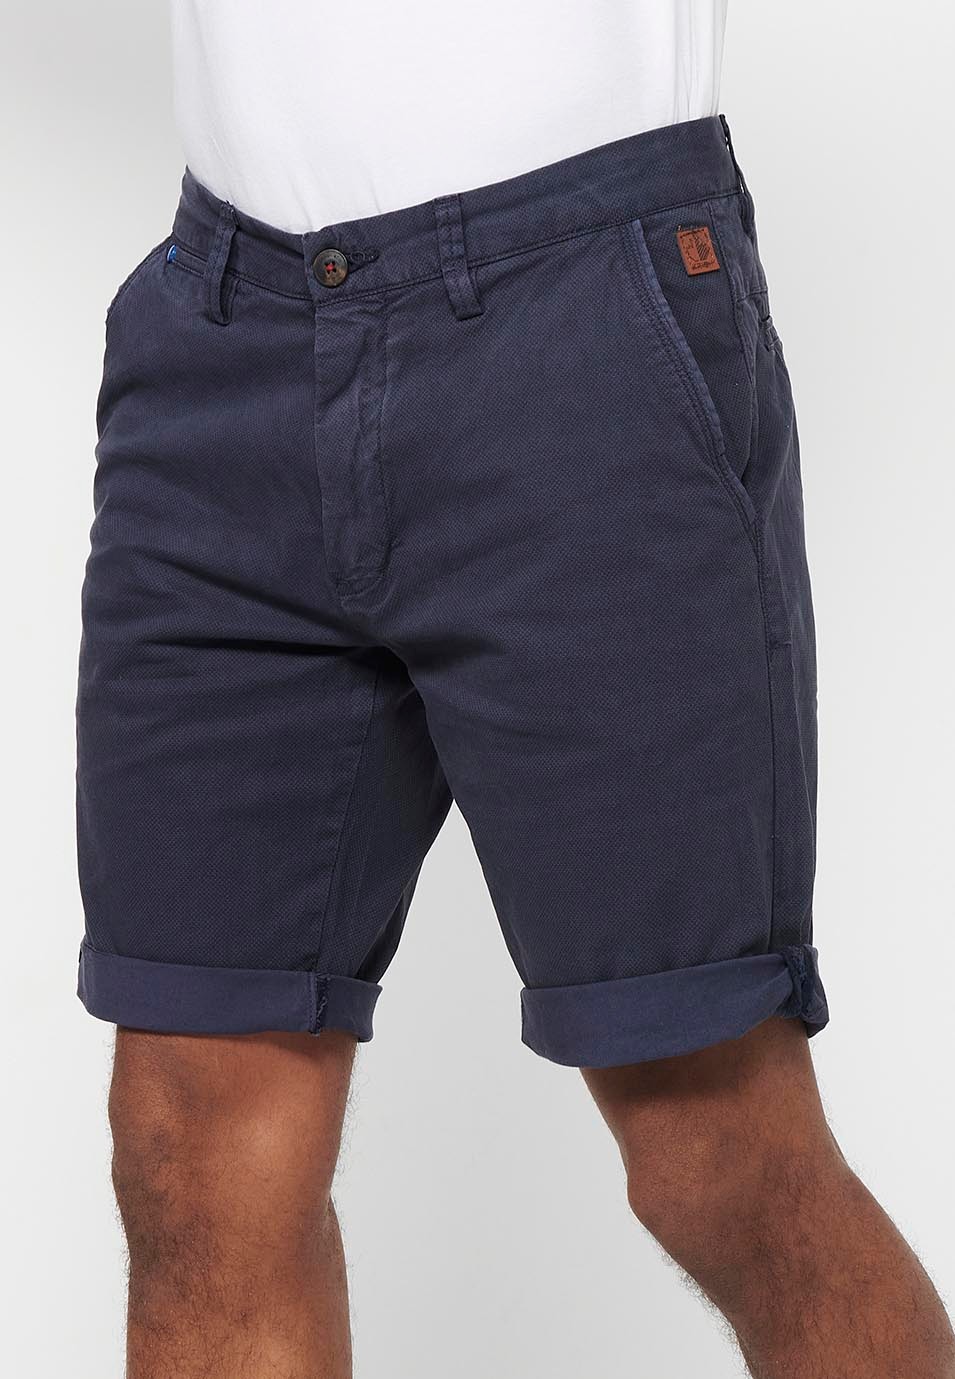 Bermuda Chino shorts with turn-up finish with front zipper and button closure with four pockets in Navy Color for Men 9